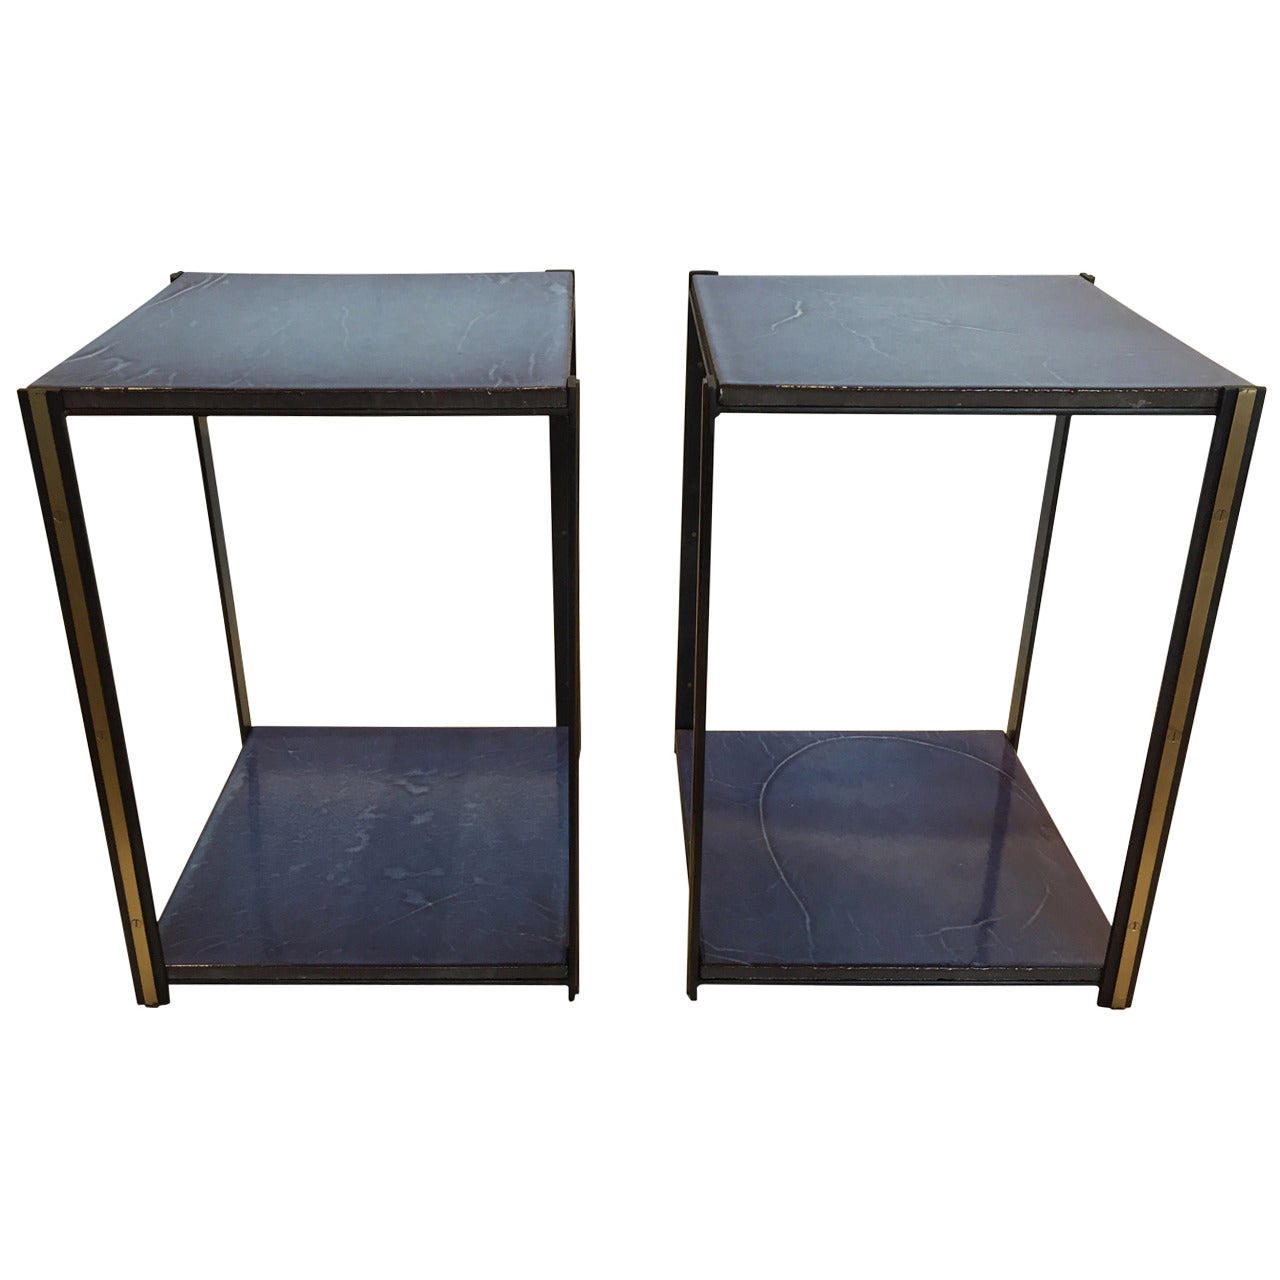 Pair of Custom Iron and Brass Side Tables with Vibrant Handmade Plateaus